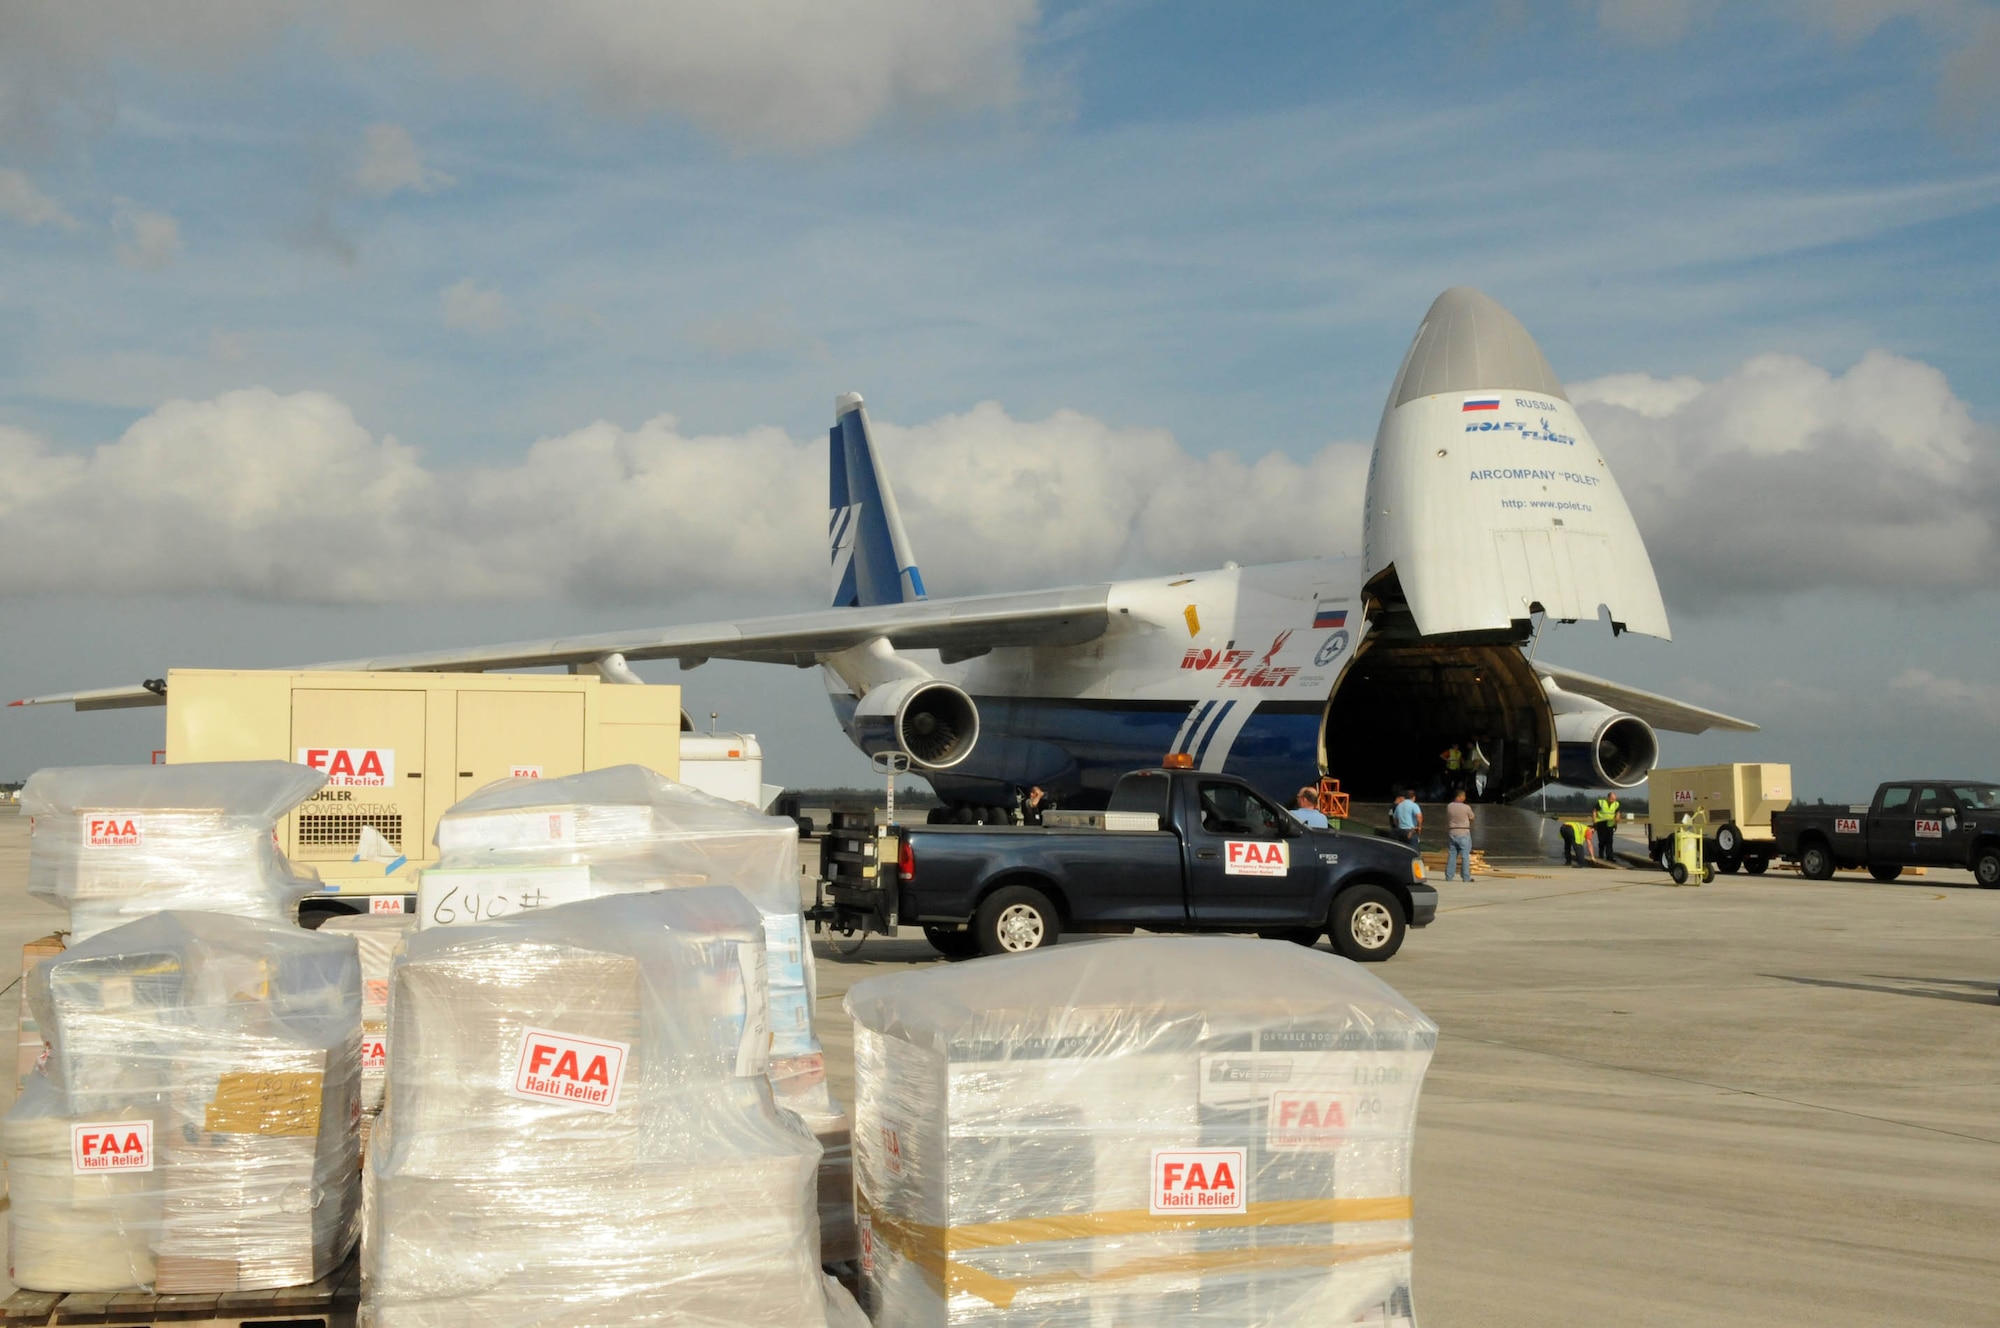 The Federal Aviation Administration load the mobile air traffic control tower, generators, food, clothing, and water aboard an Antonov An-124 en route to Haiti. The tower will be used to help improve proficiency of aircraft flying in and out of Haiti. The supplies will be used to support Operation Unified Response. (U.S. Air Force photo/Master Sgt. Sabrina Johnson)